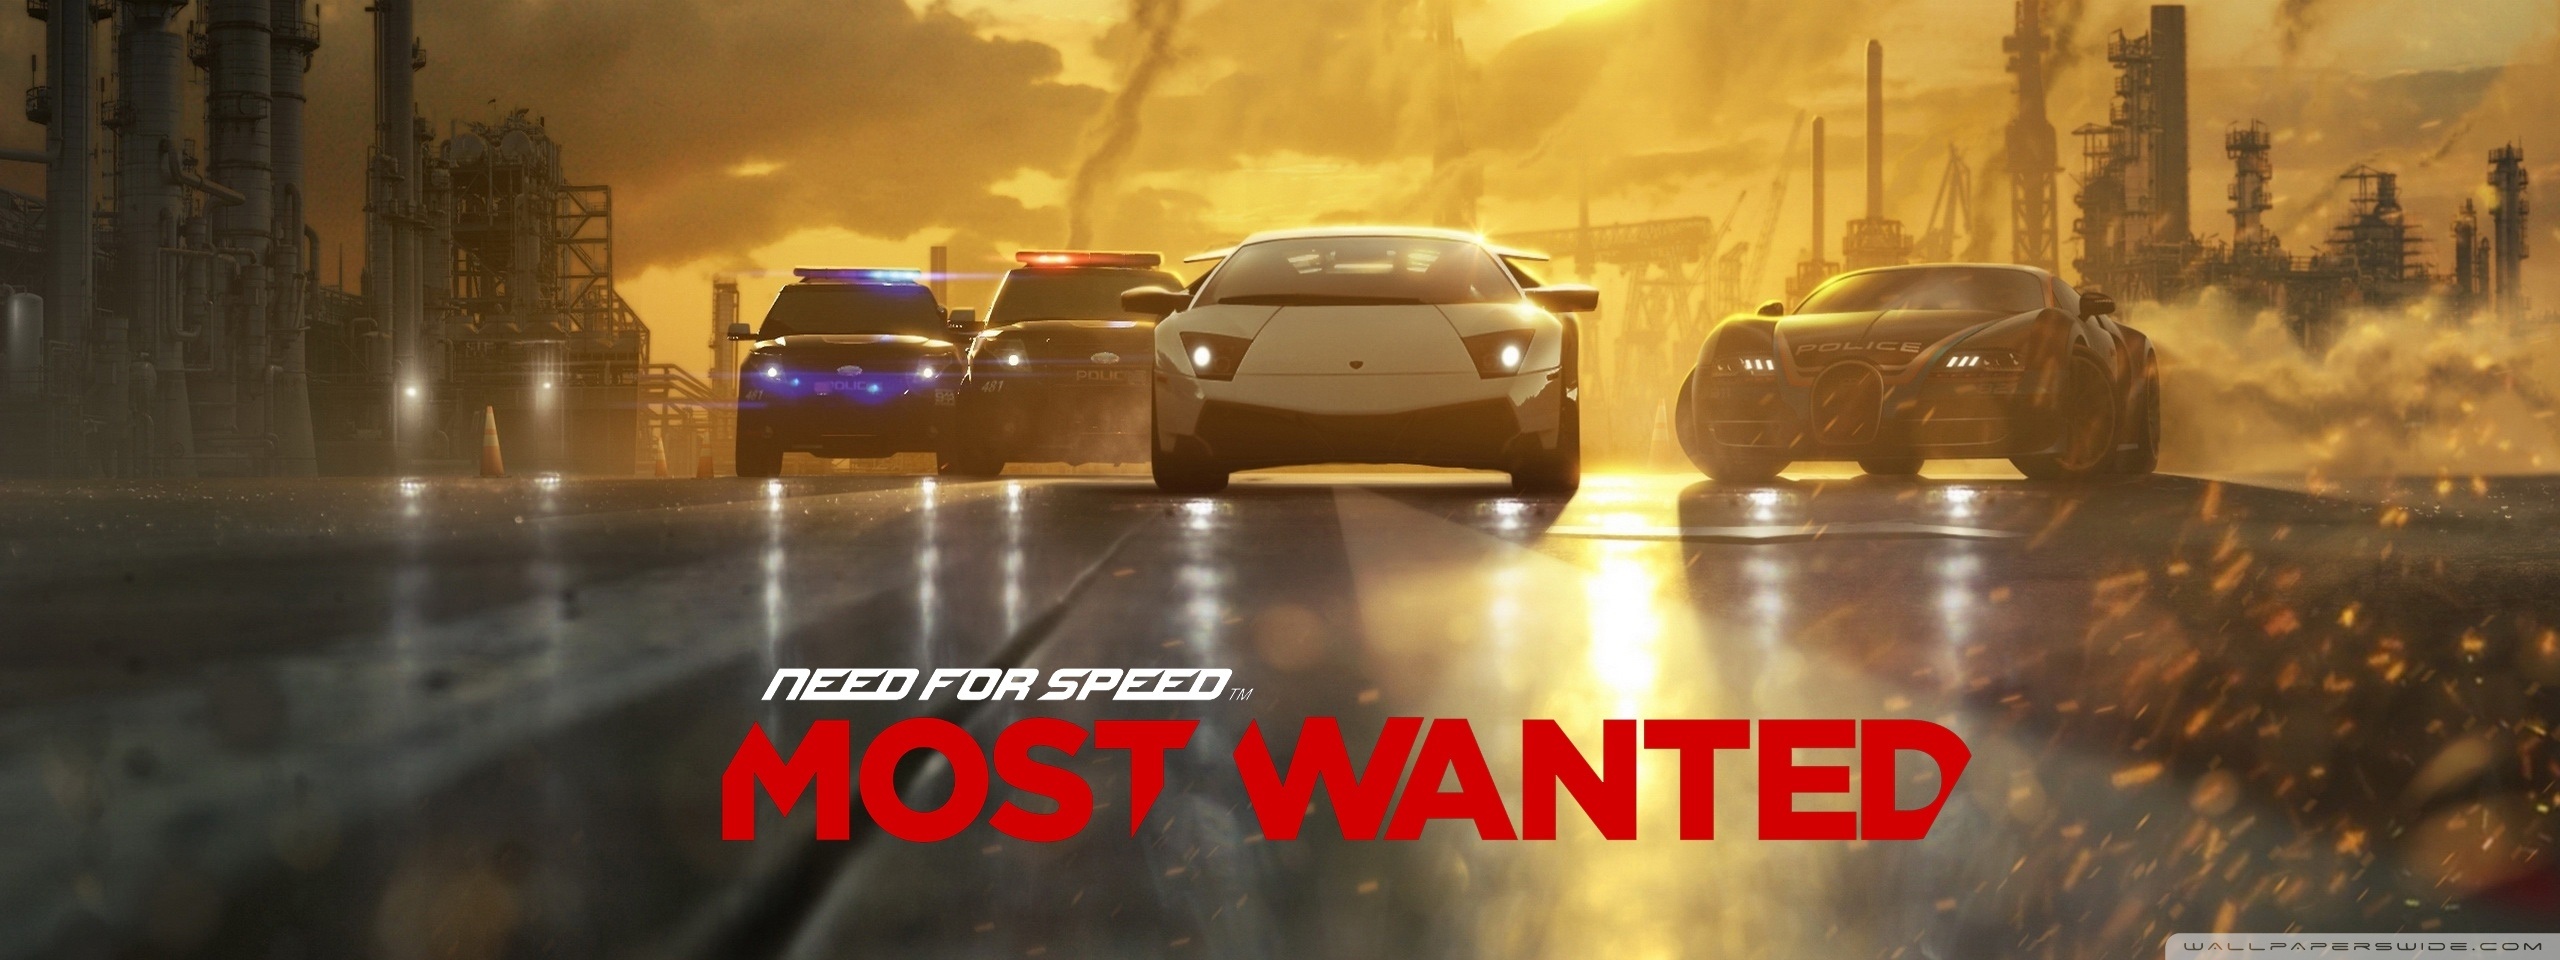 Need for Speed Most Wanted 2012 Ultra HD Desktop Background Wallpaper for :  Widescreen & UltraWide Desktop & Laptop : Multi Display, Dual Monitor :  Tablet : Smartphone